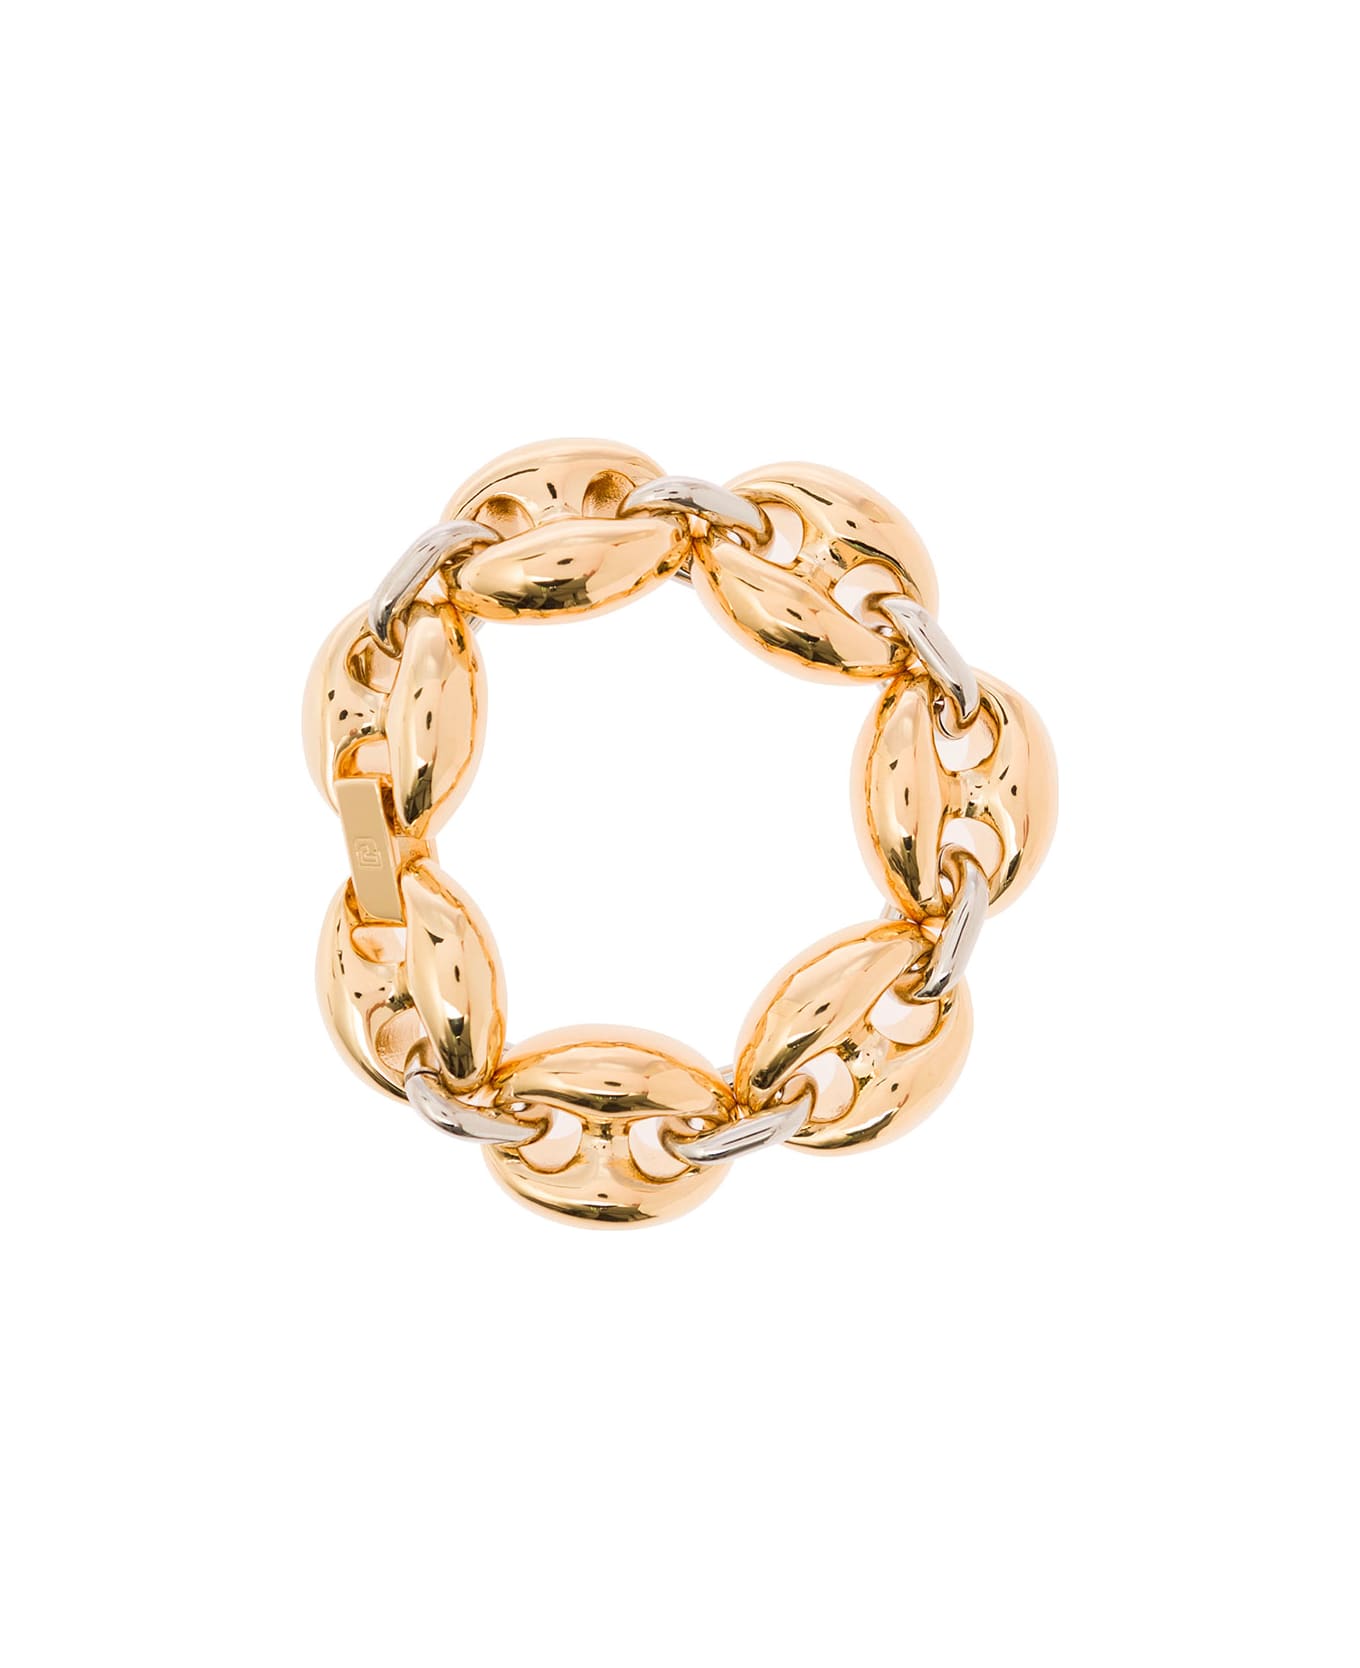 Paco Rabanne Gold And Silver Chunky Bracelet With Engraved Logo In Brass And Alluminium Woman - Golden